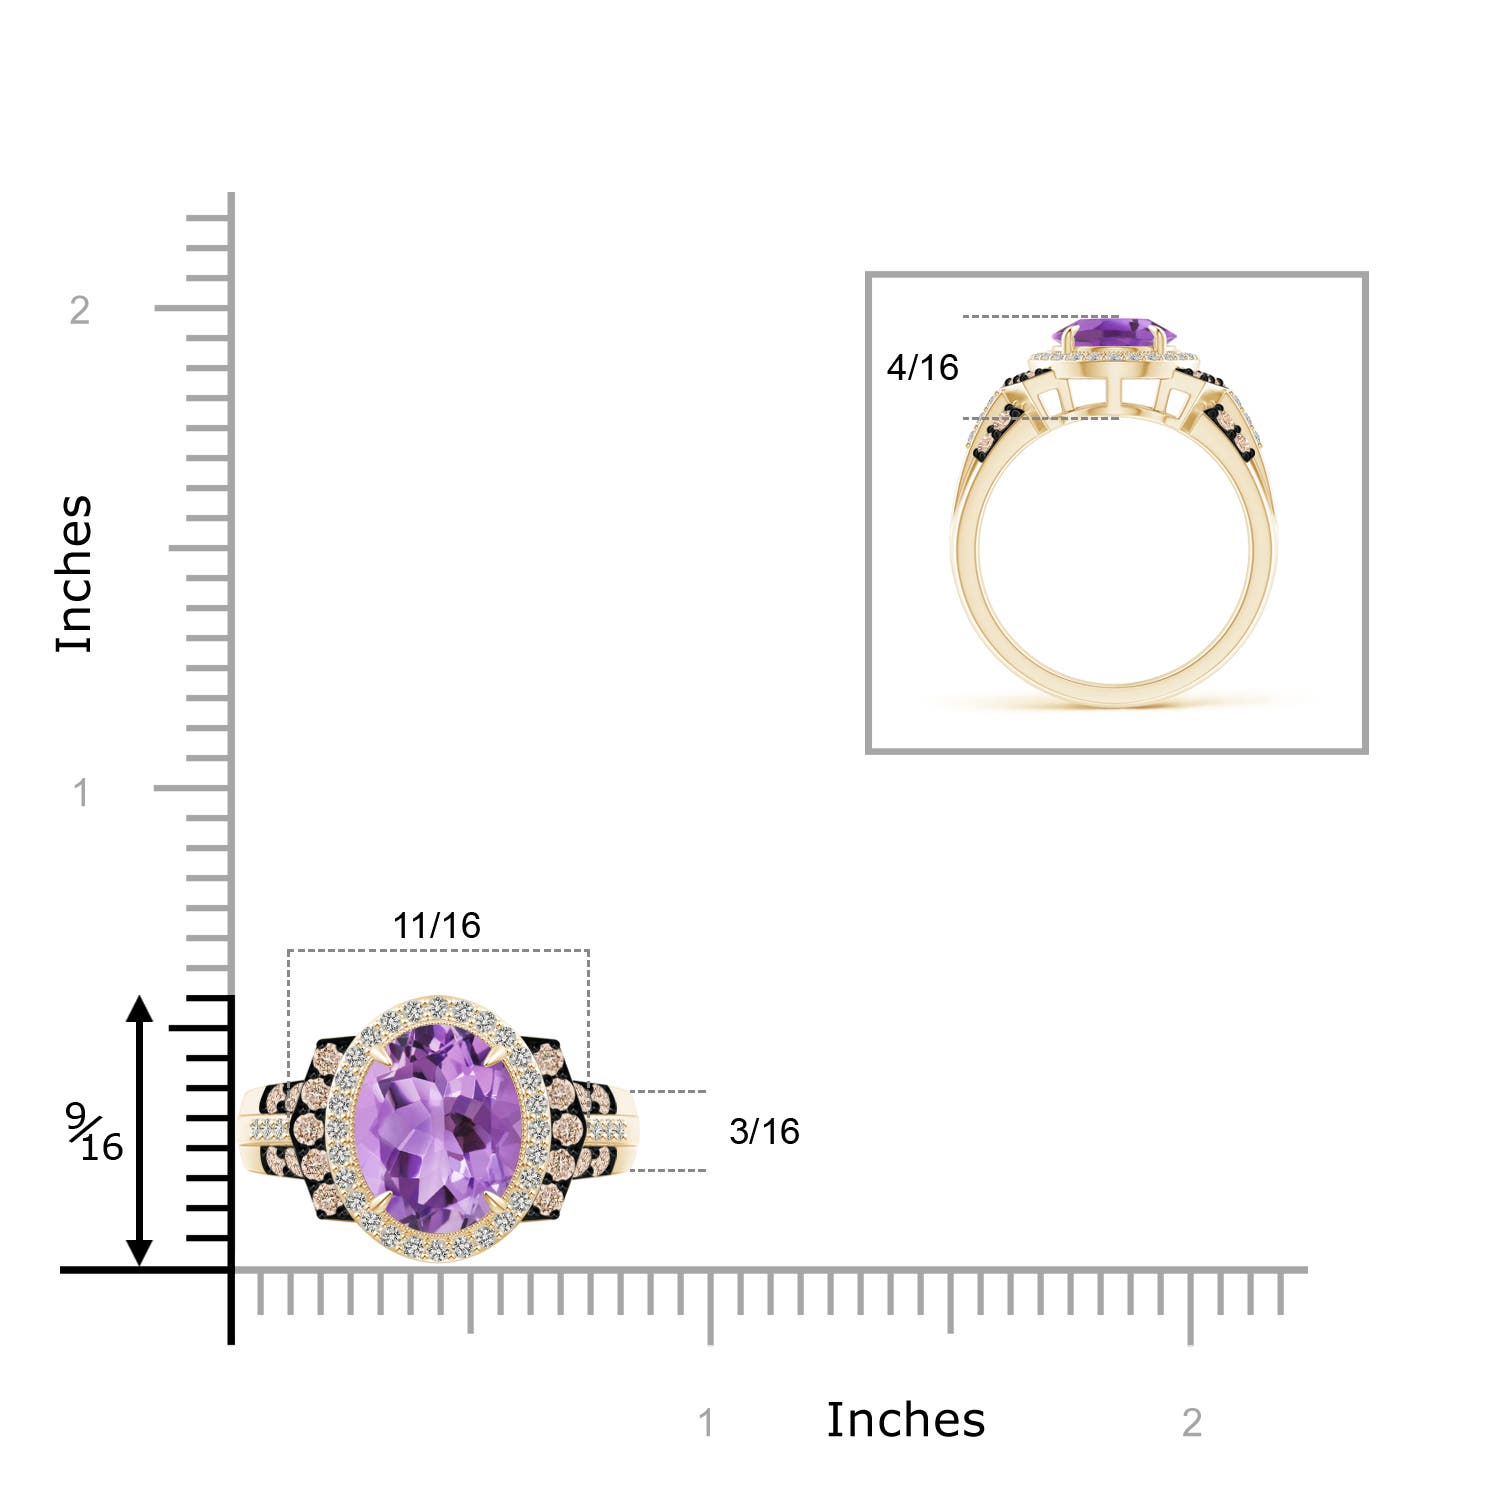 A - Amethyst / 3.8 CT / 14 KT Yellow Gold